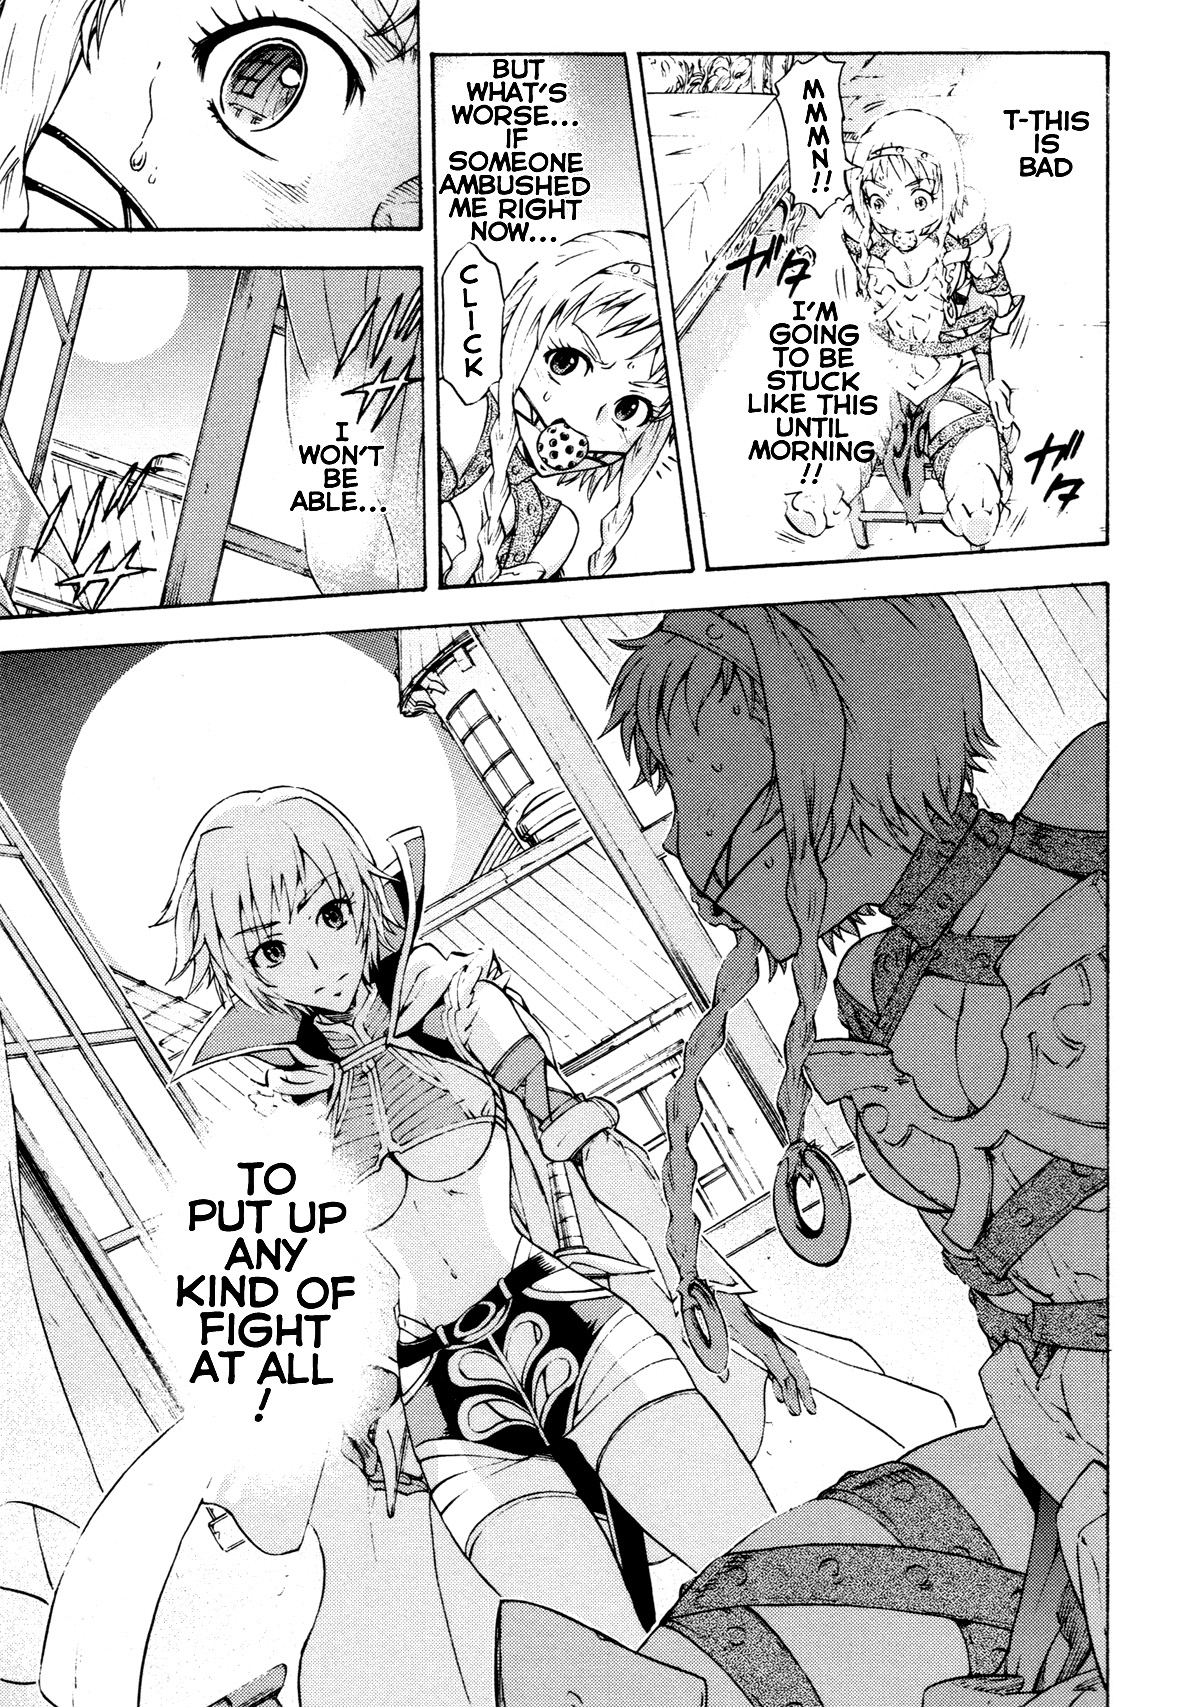 Queen's Blade Anthology Vol. 1 Ch. 1 My Lovely Sister